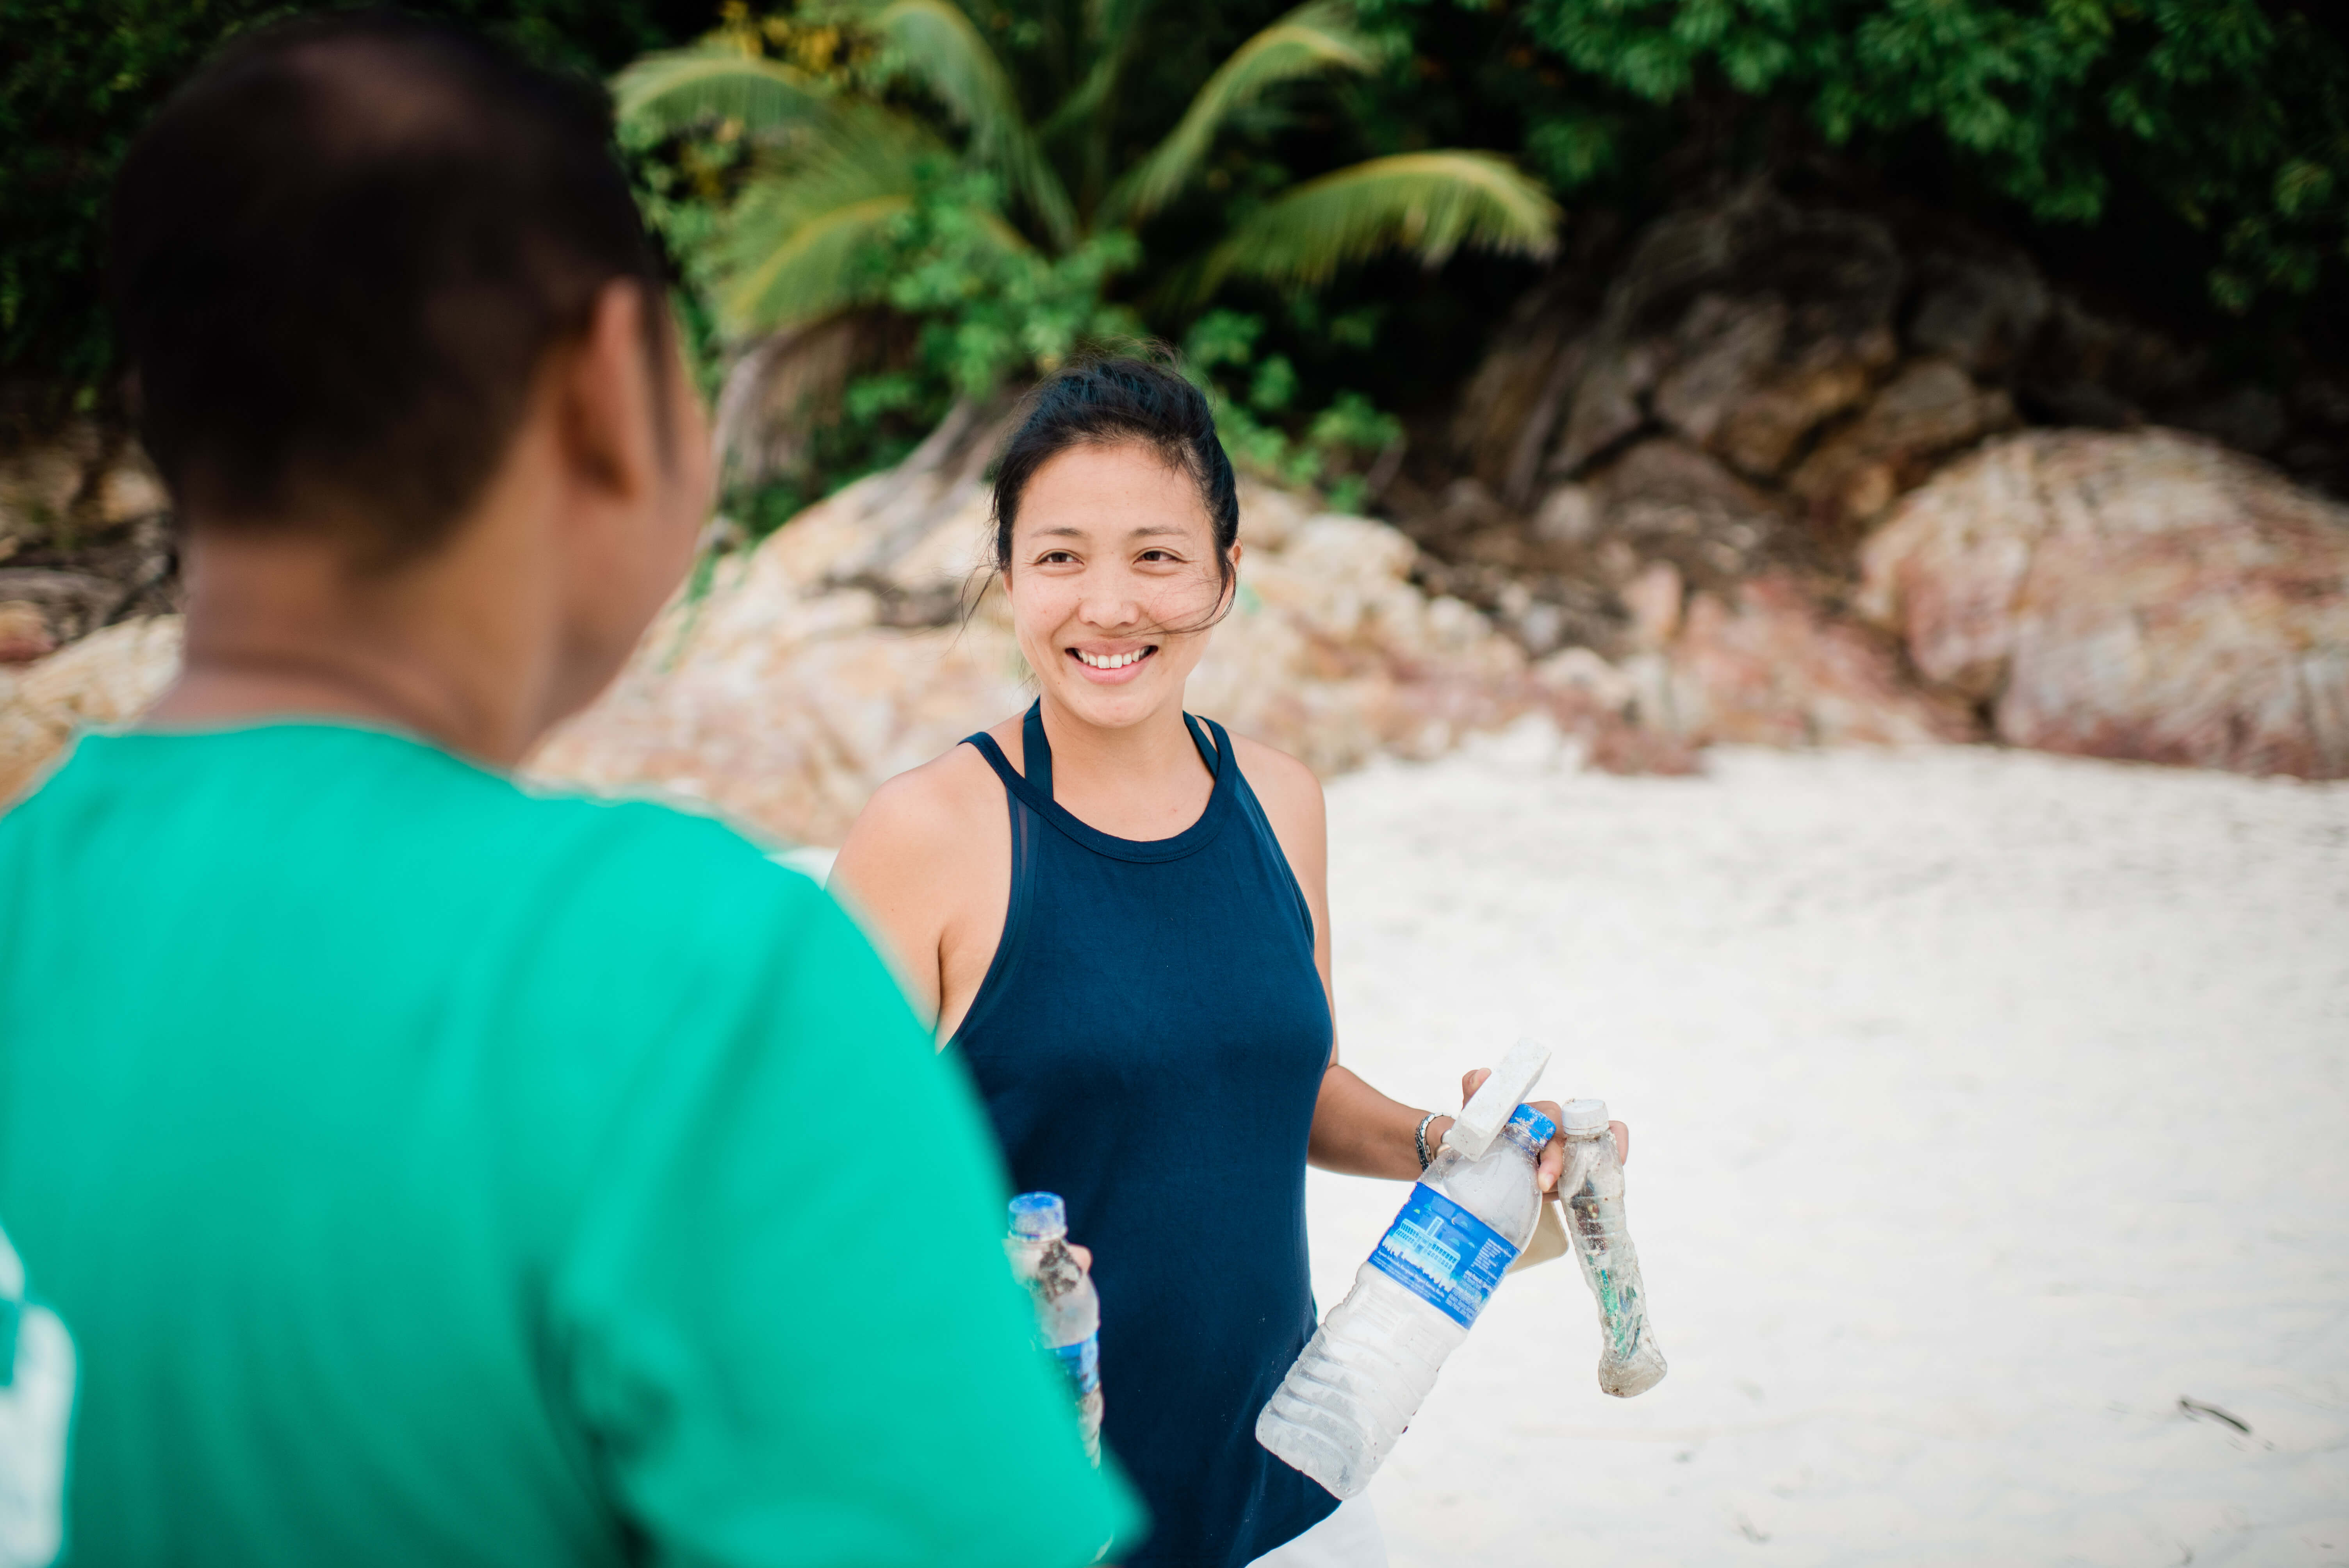 Co-founder and Managing Director Cher Chua-Lassalvy (pictured) put the resort on its path towards conservation, when she realised she could do more than just minimising the resort’s impact on the environment. Photo by Kenny Ng 